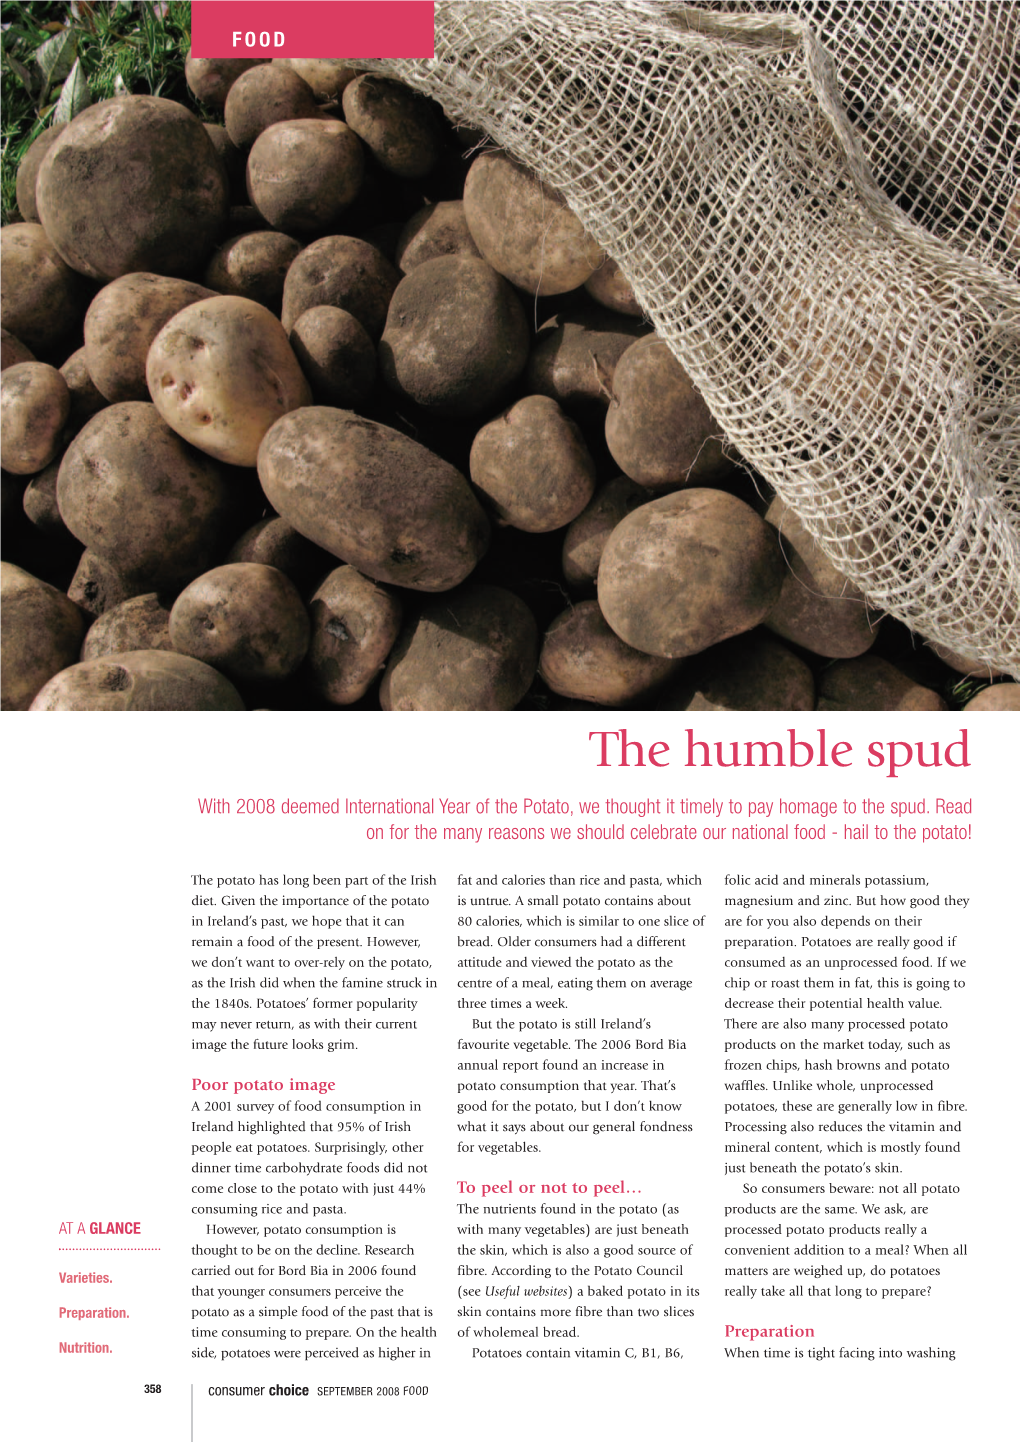 The Humble Spud with 2008 Deemed International Year of the Potato, We Thought It Timely to Pay Homage to the Spud